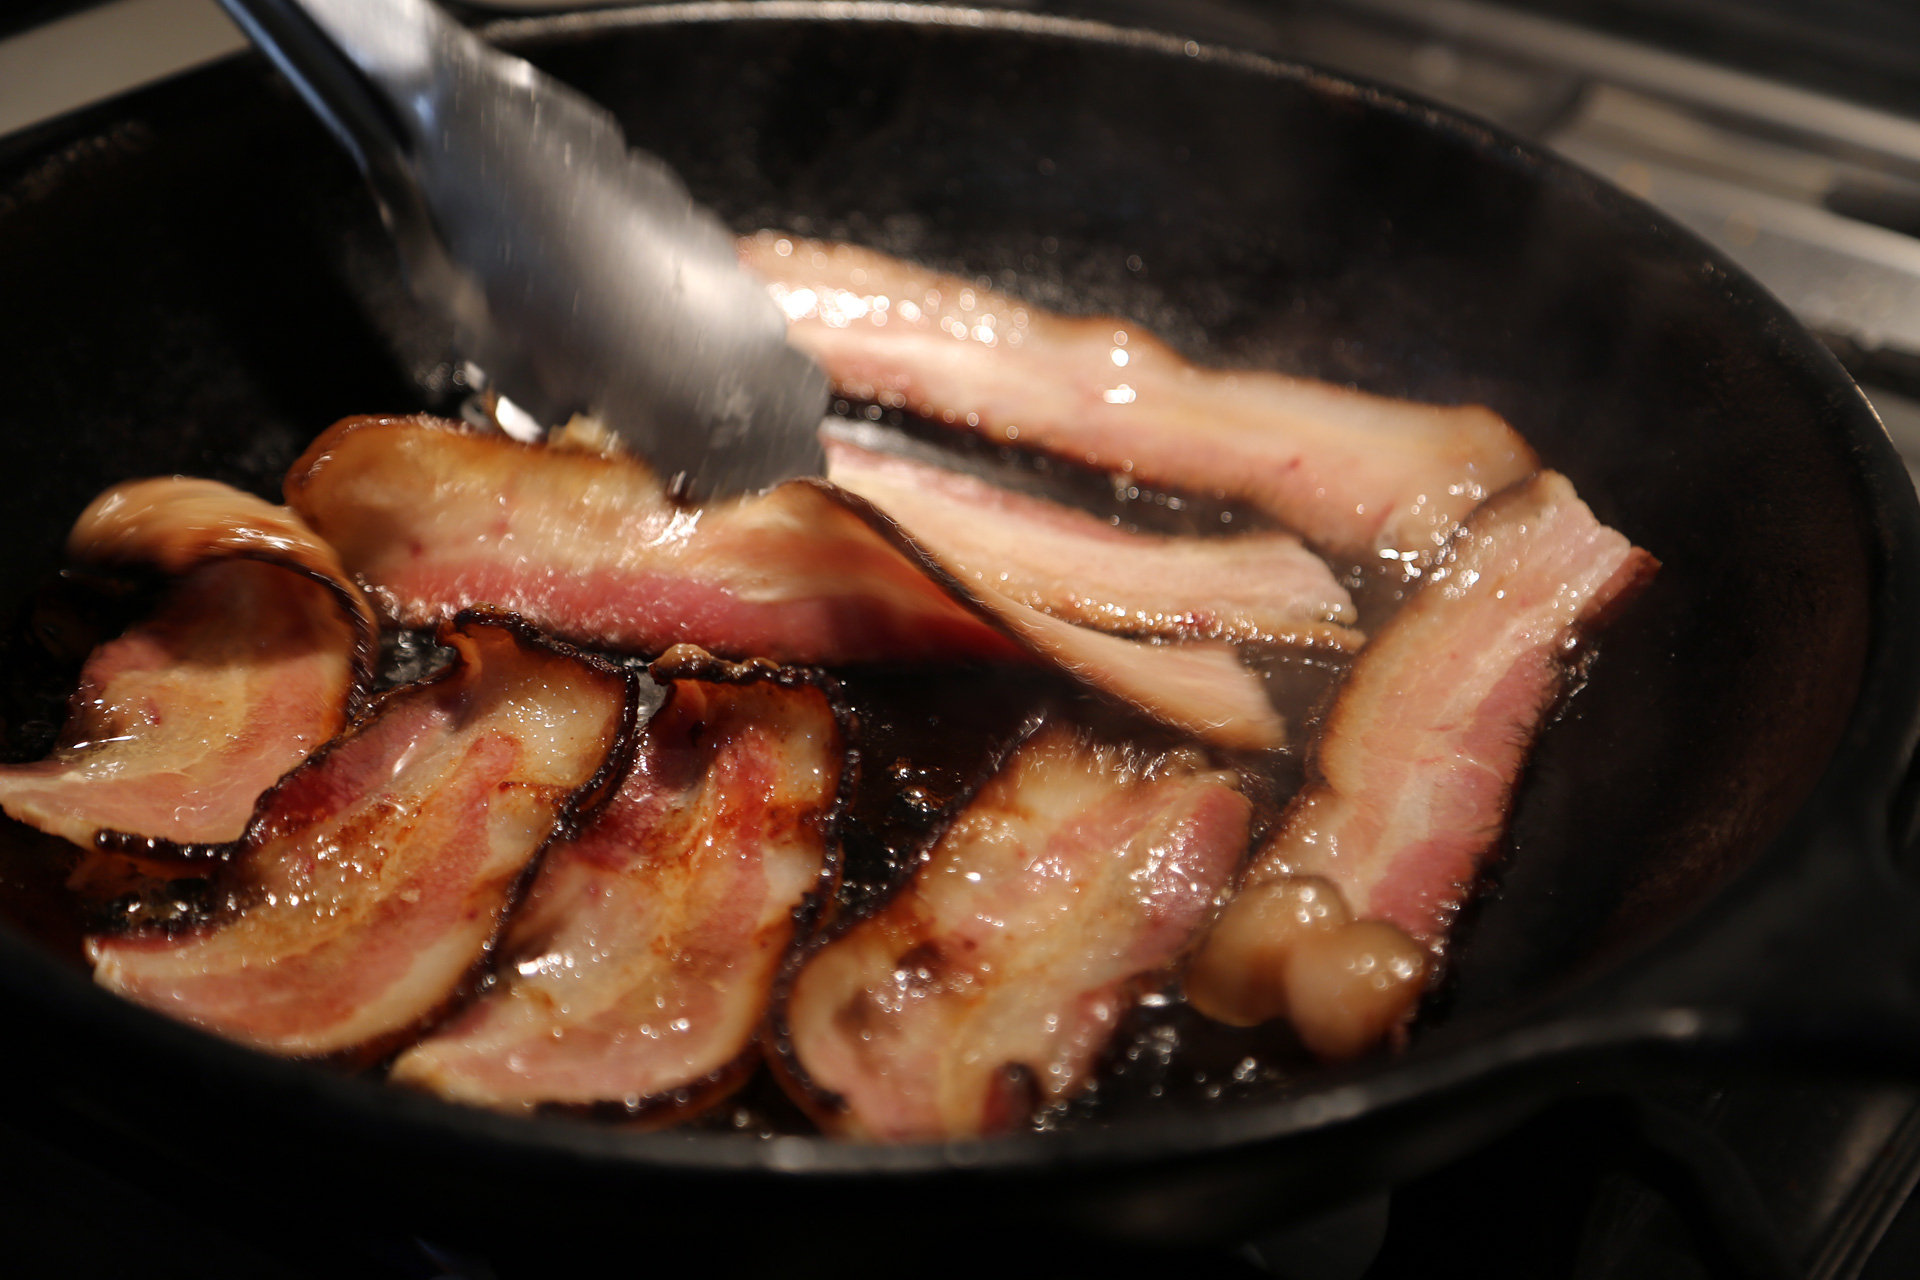 In a well-seasoned 12-inch cast iron or other heavy frying pan, fry the bacon over medium heat until the fat is rendered and the bacon is crisp.